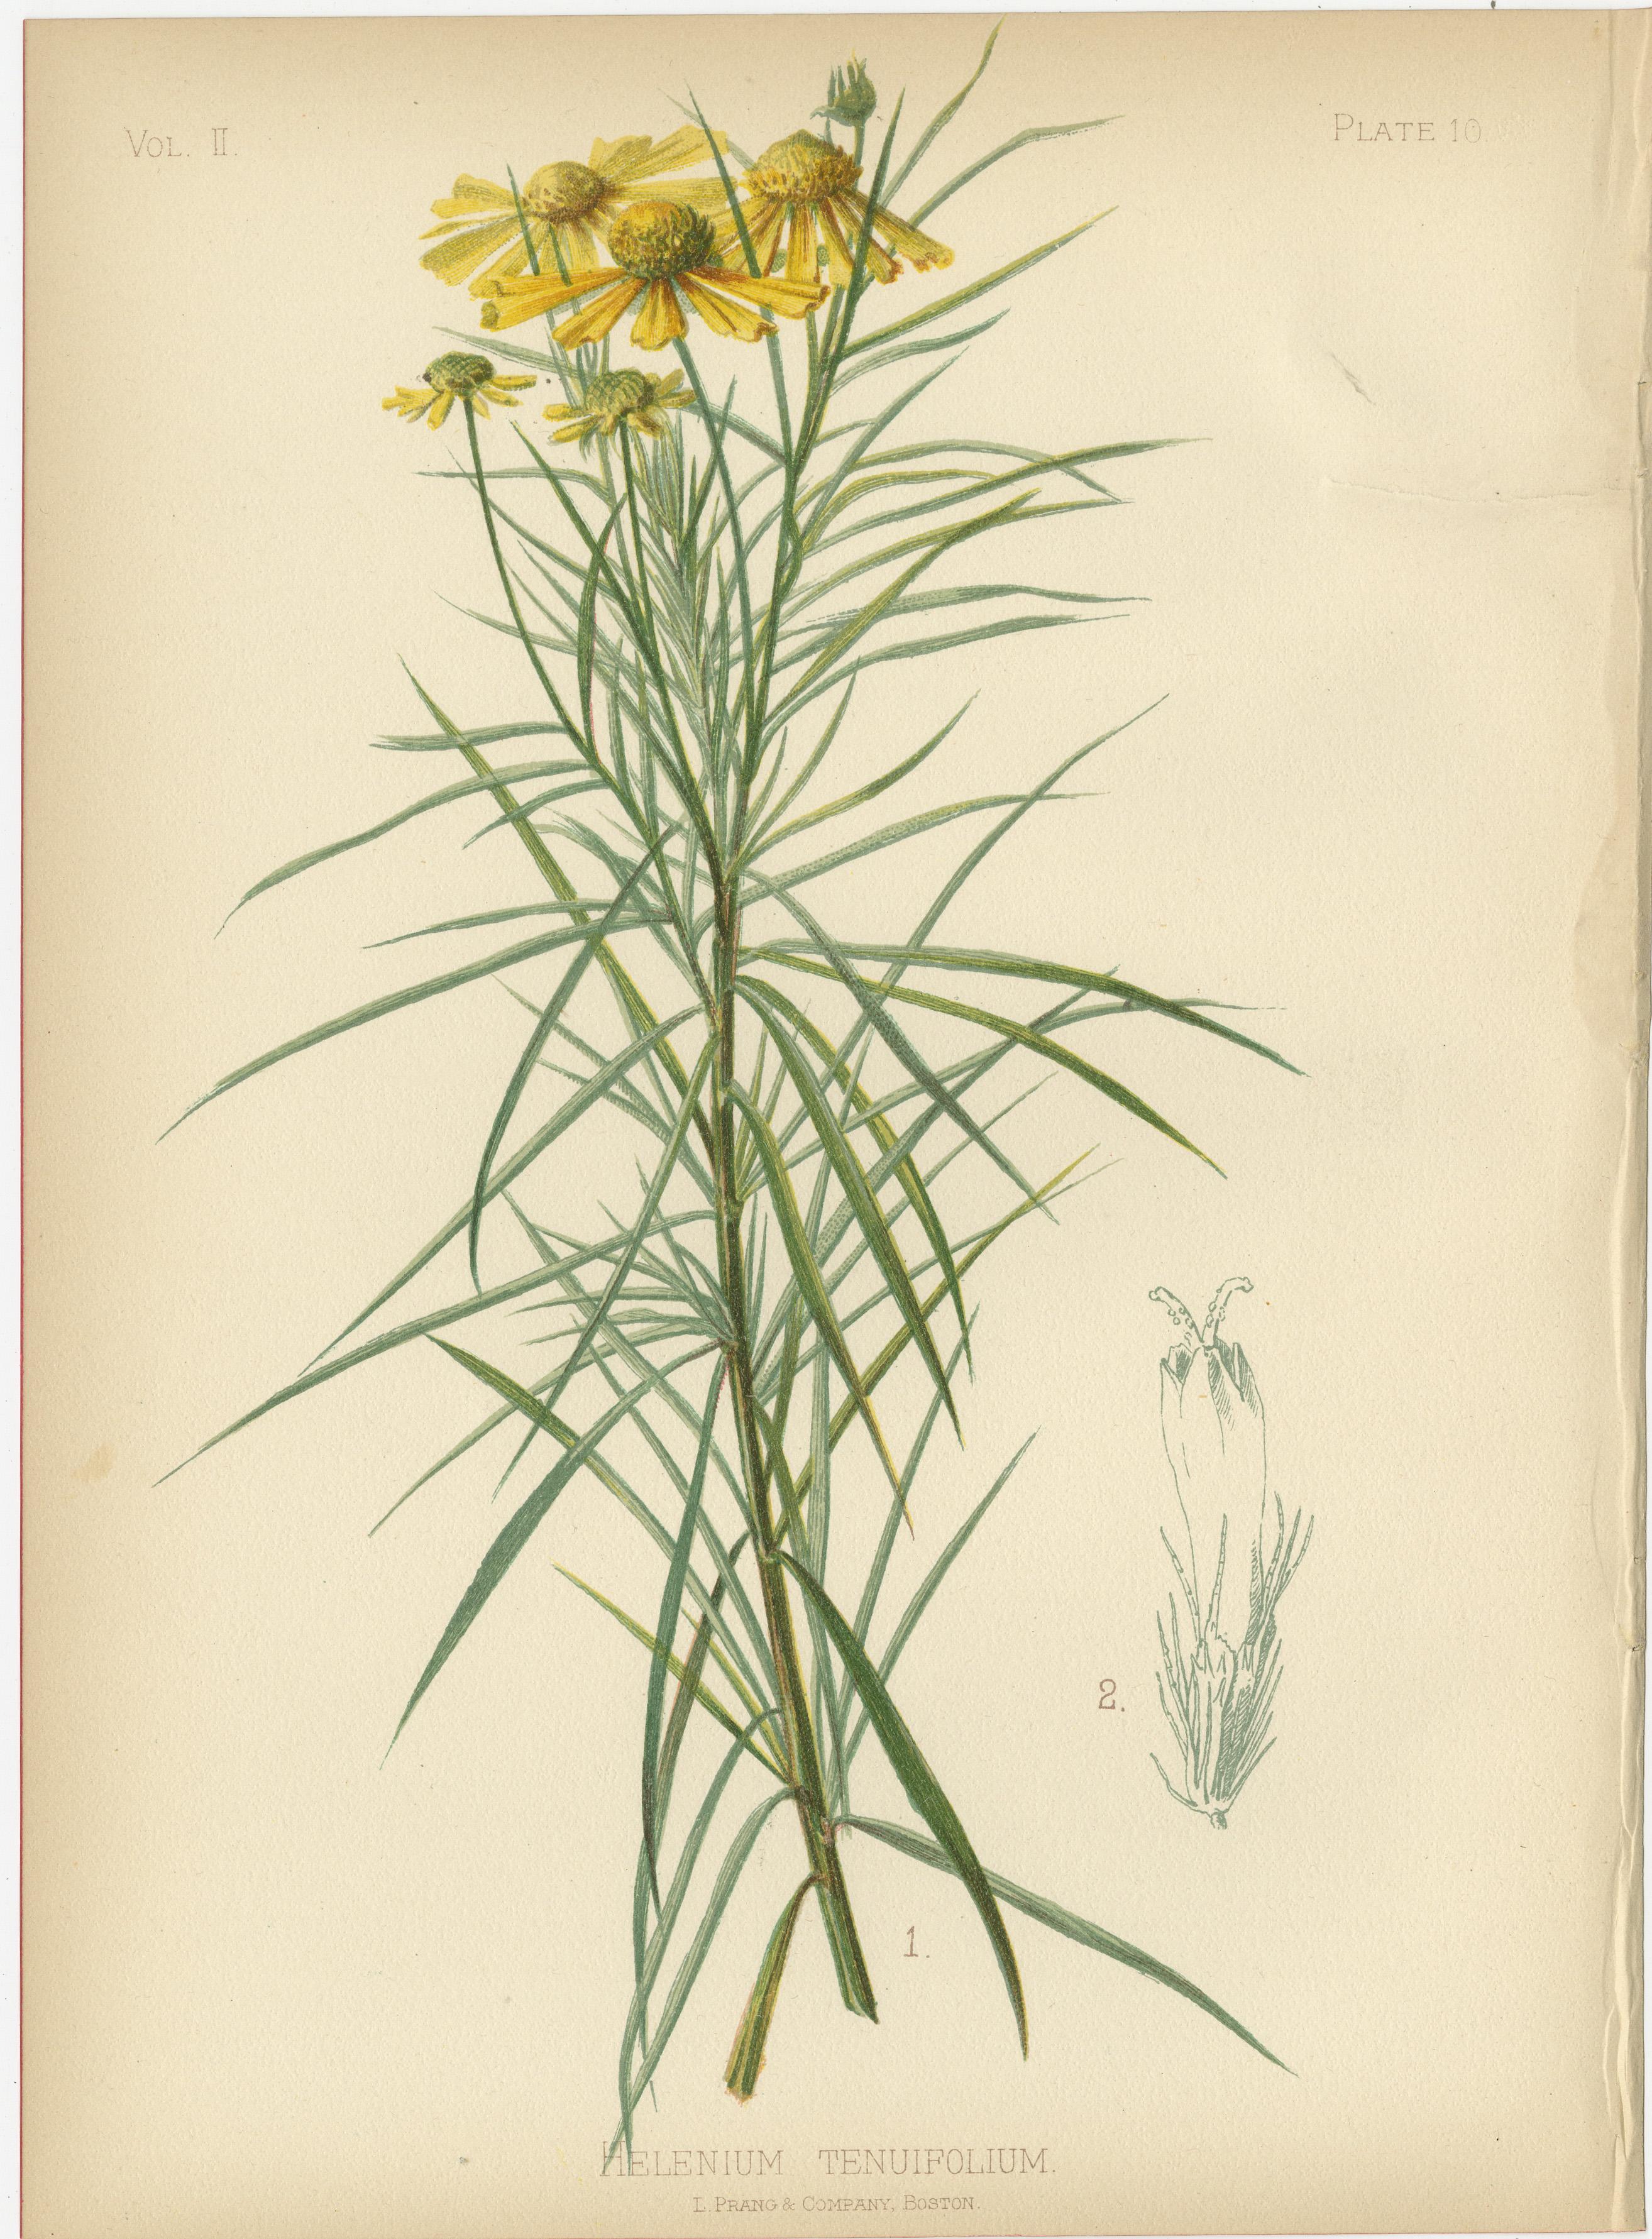 The images depict a variety of plants featured in Thomas Meehan's 